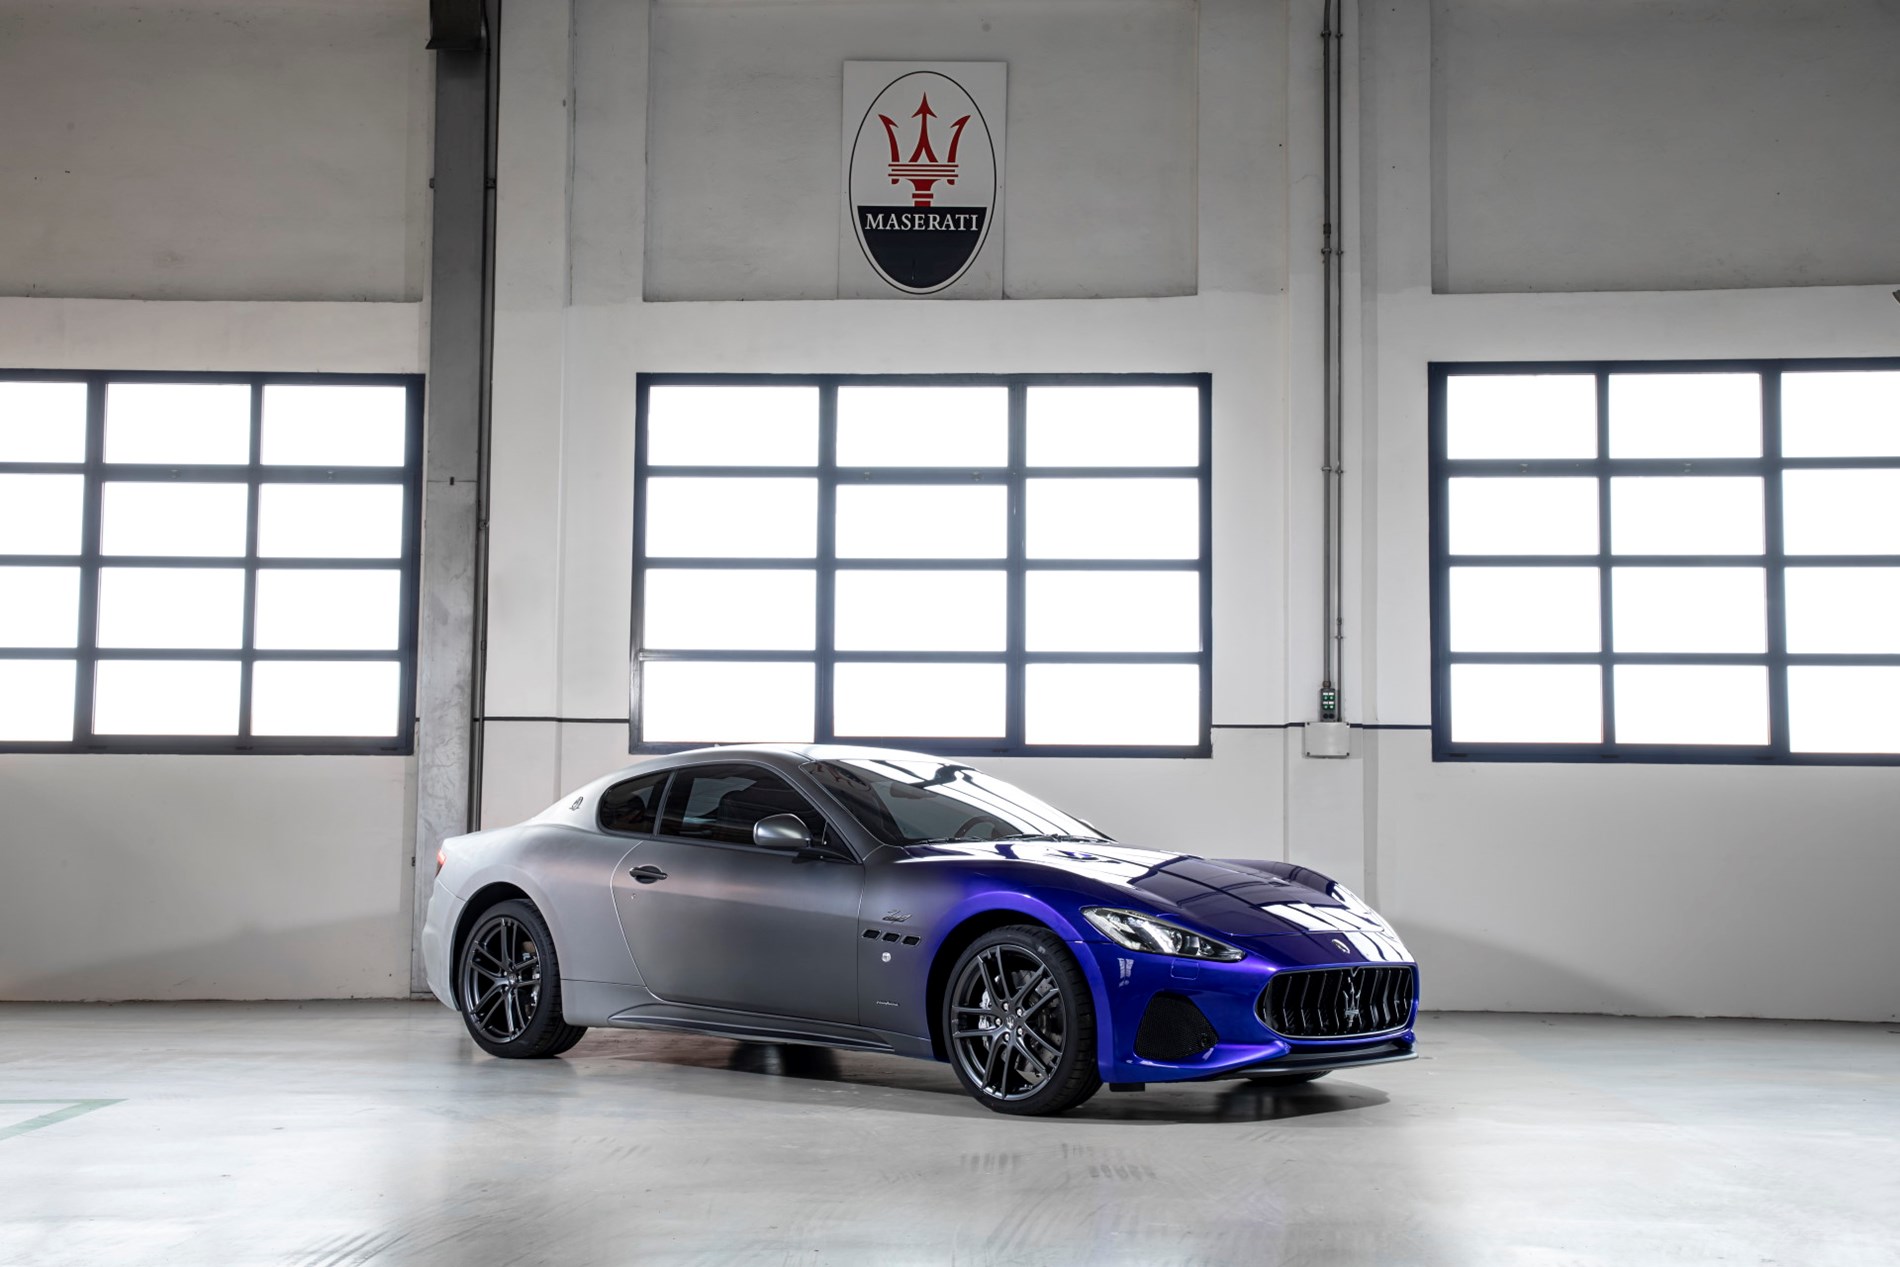 GranTurismo Zéda projects Maserati towards the future: from the Modena plant the new era for the Brand begins